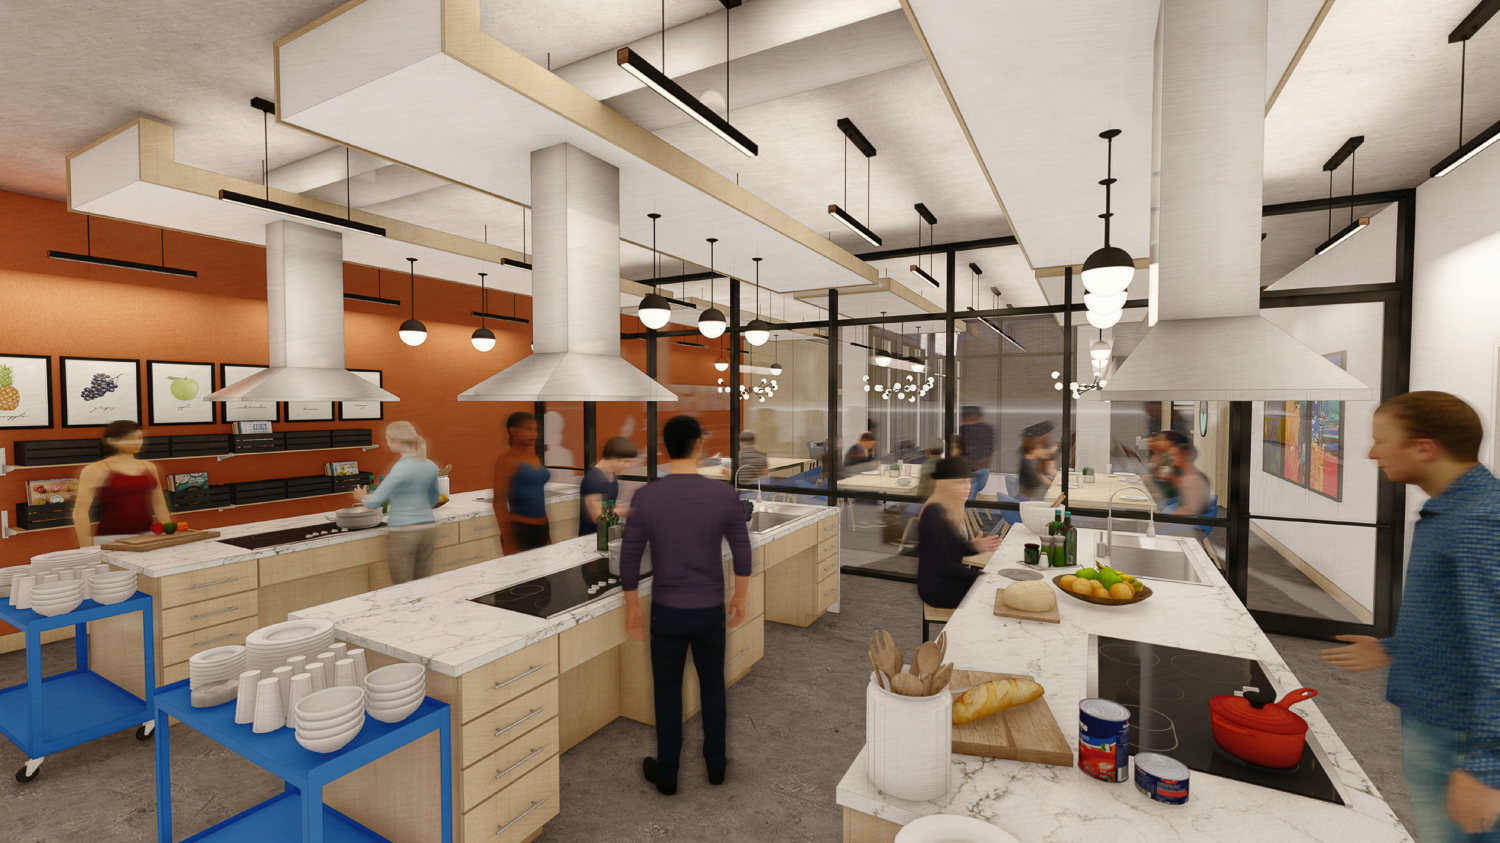 1500 15th Street communal kitchen and dining area, rendering by Prime Design